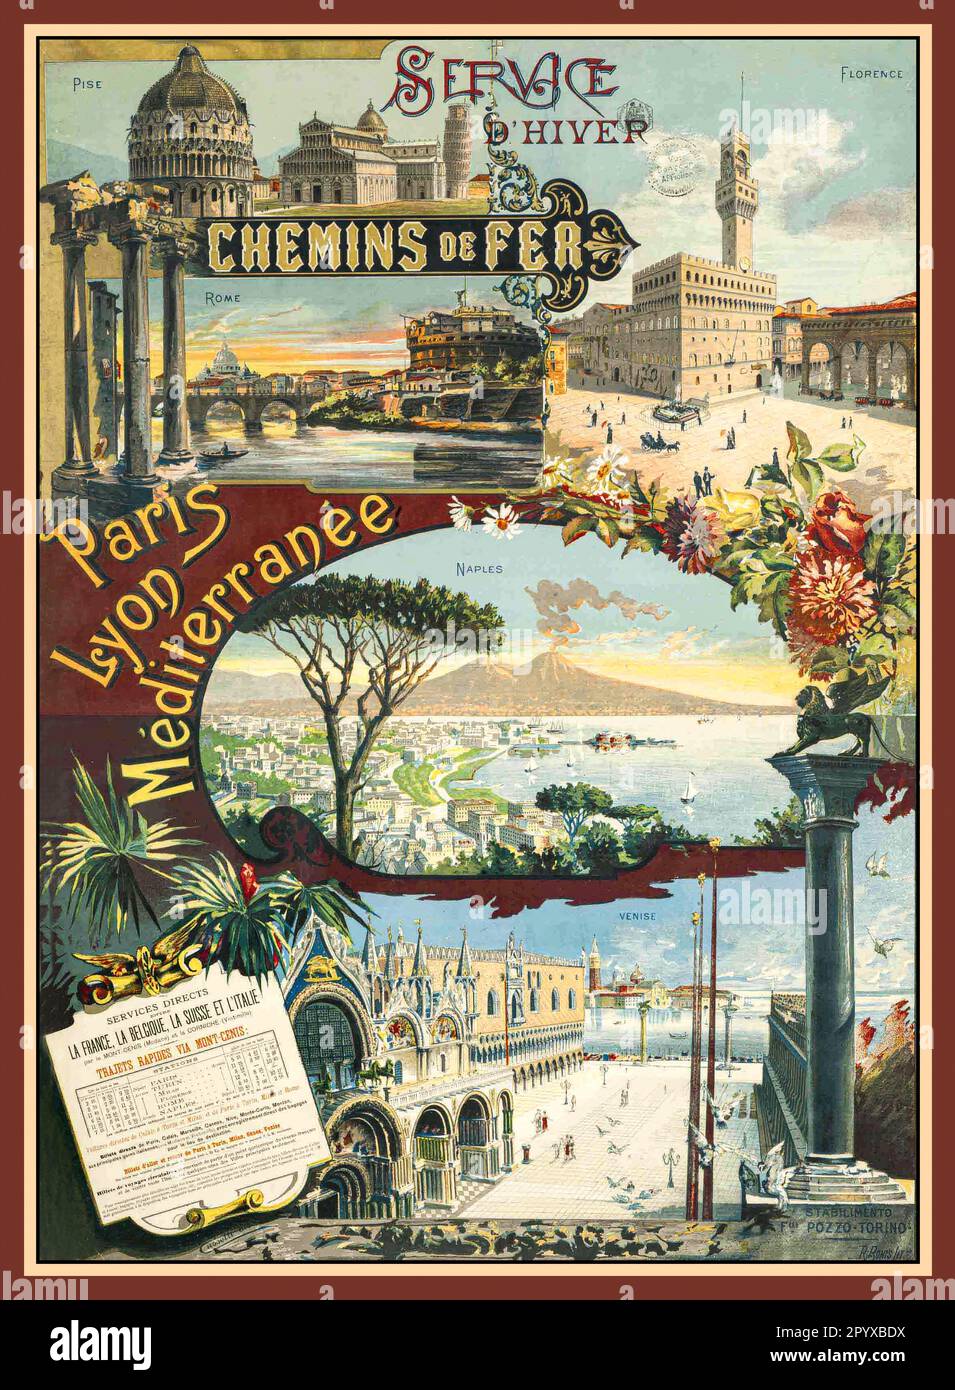 Vintage Italy Travel Poster PLM Italie Service d'hiver featuring Pisa, Florence.Rome, Naples and Venice.with routes to PLM. Paris Lyon and Mediterranee 19thC Stock Photo